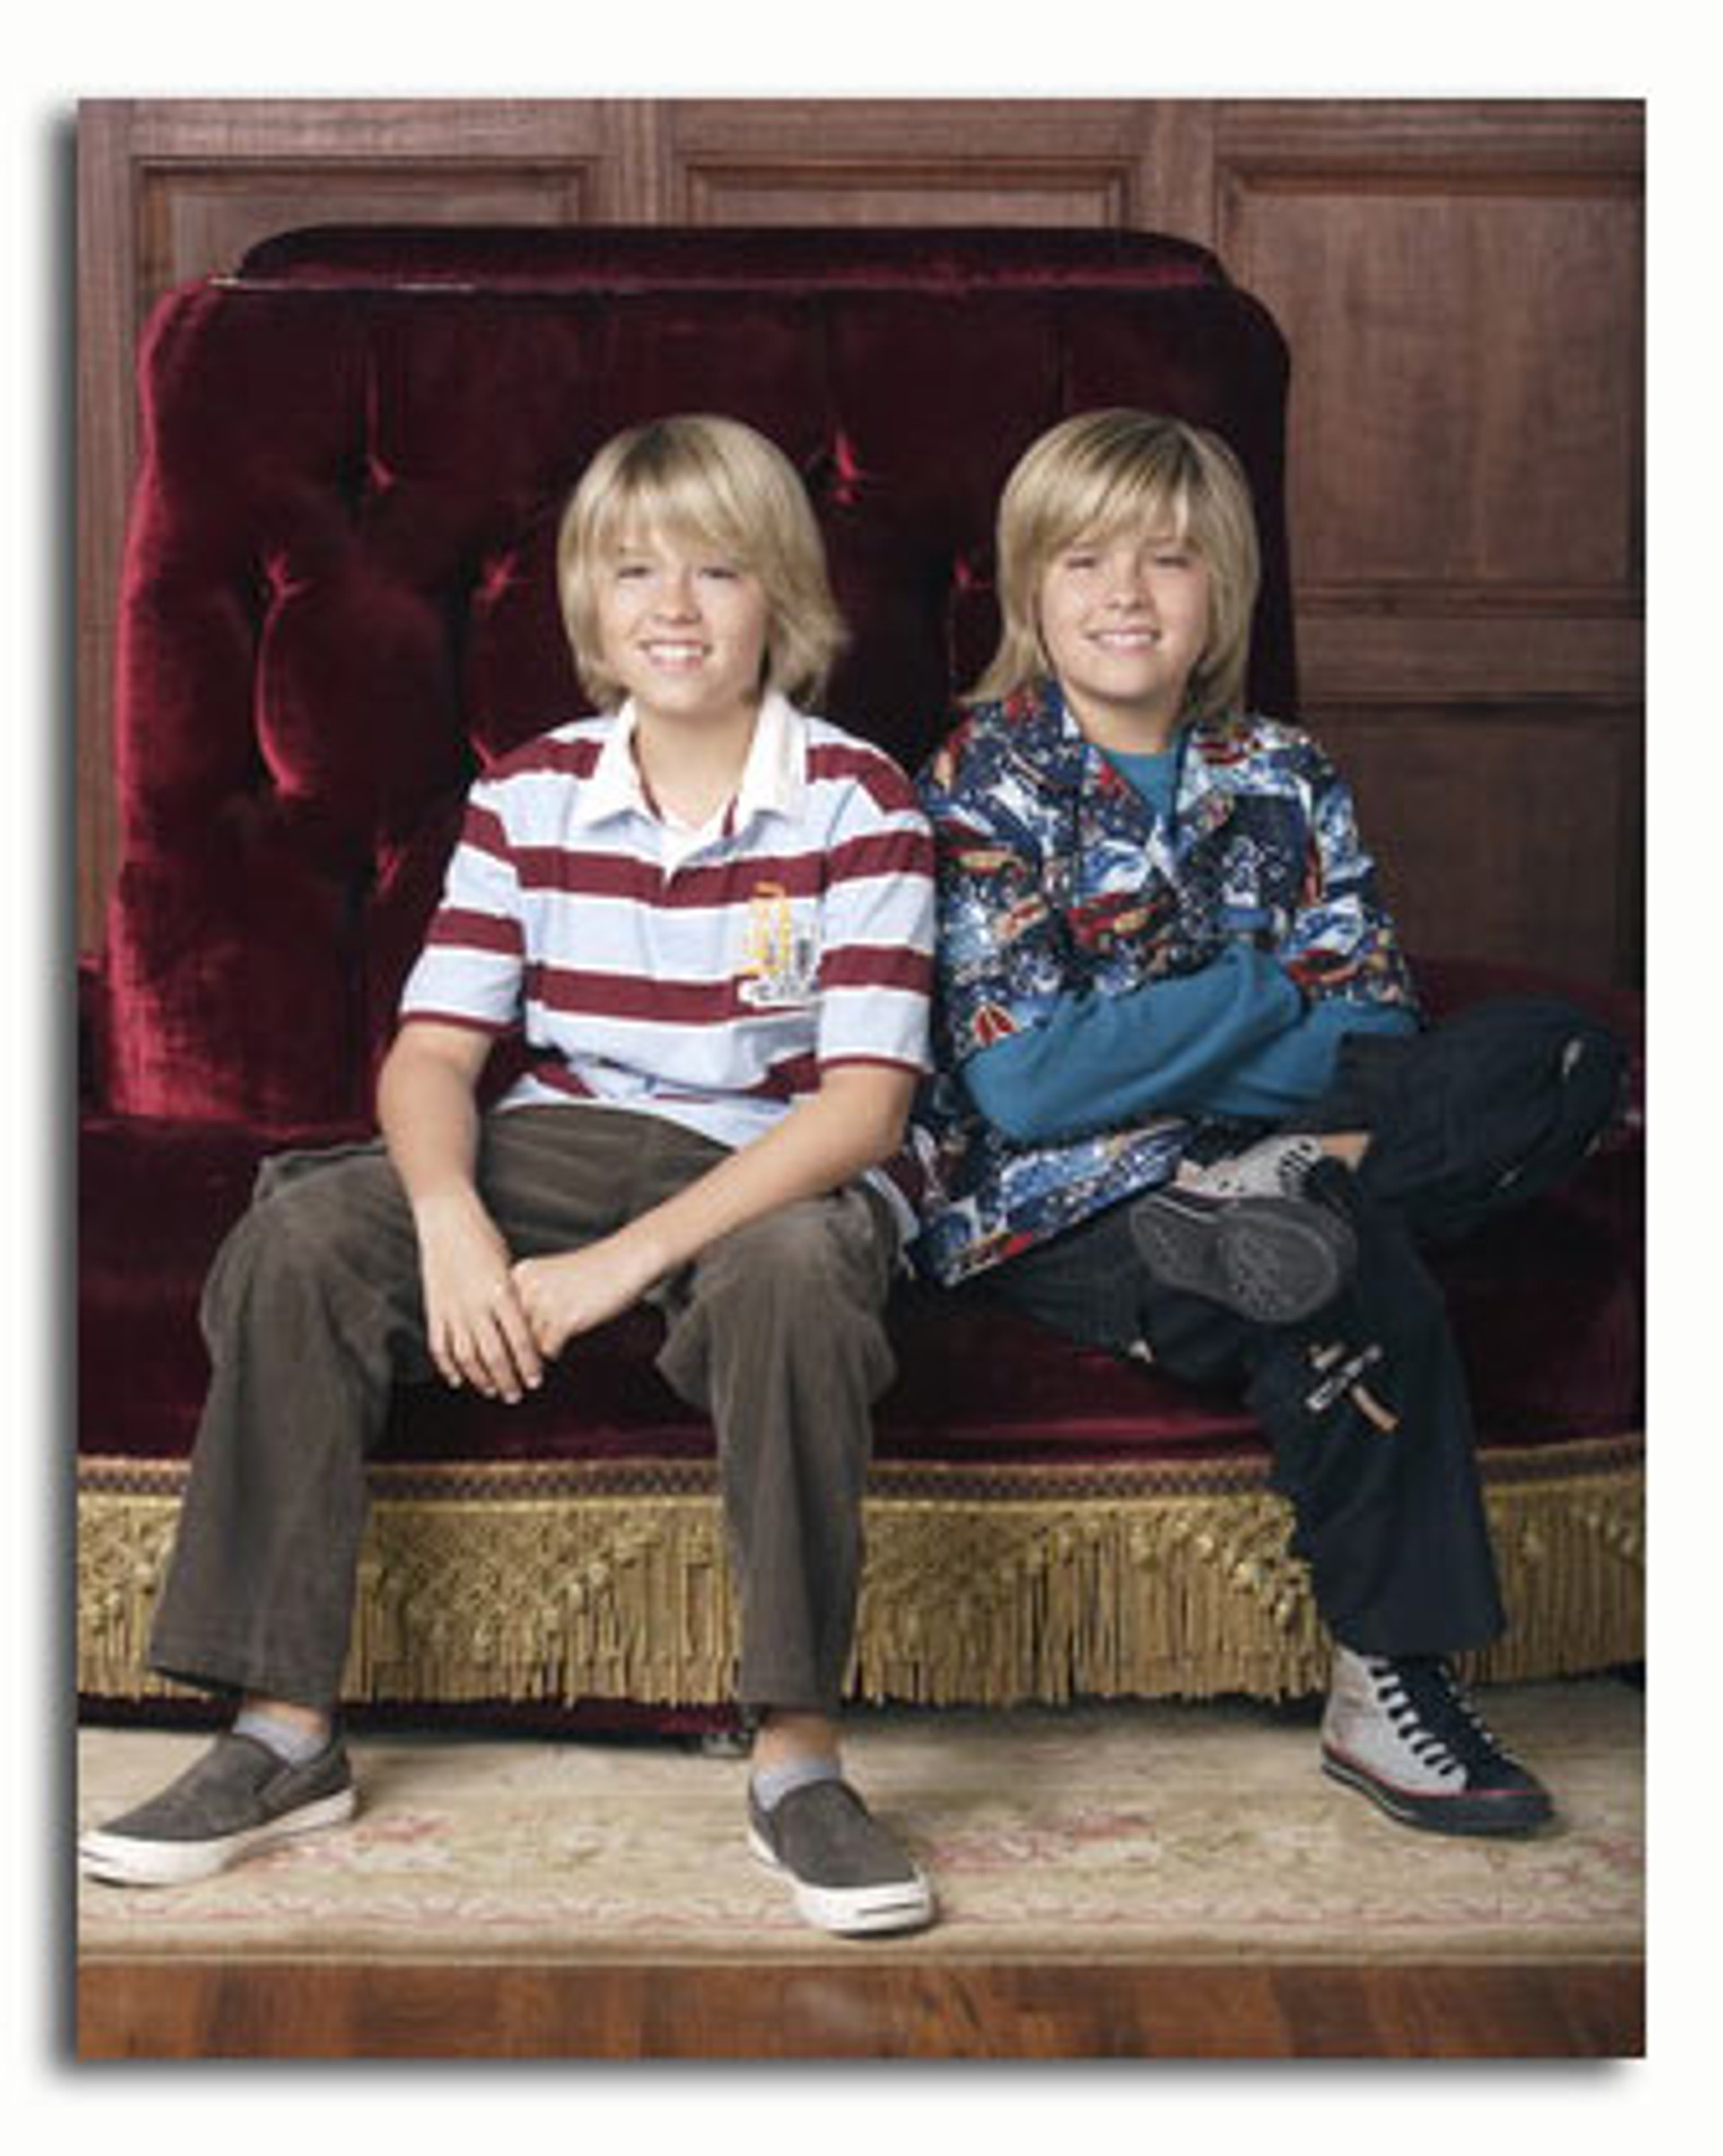 Ss3578900 Movie Picture Of The Suite Life Of Zack And Cody Buy Celebrity Photos And Posters At